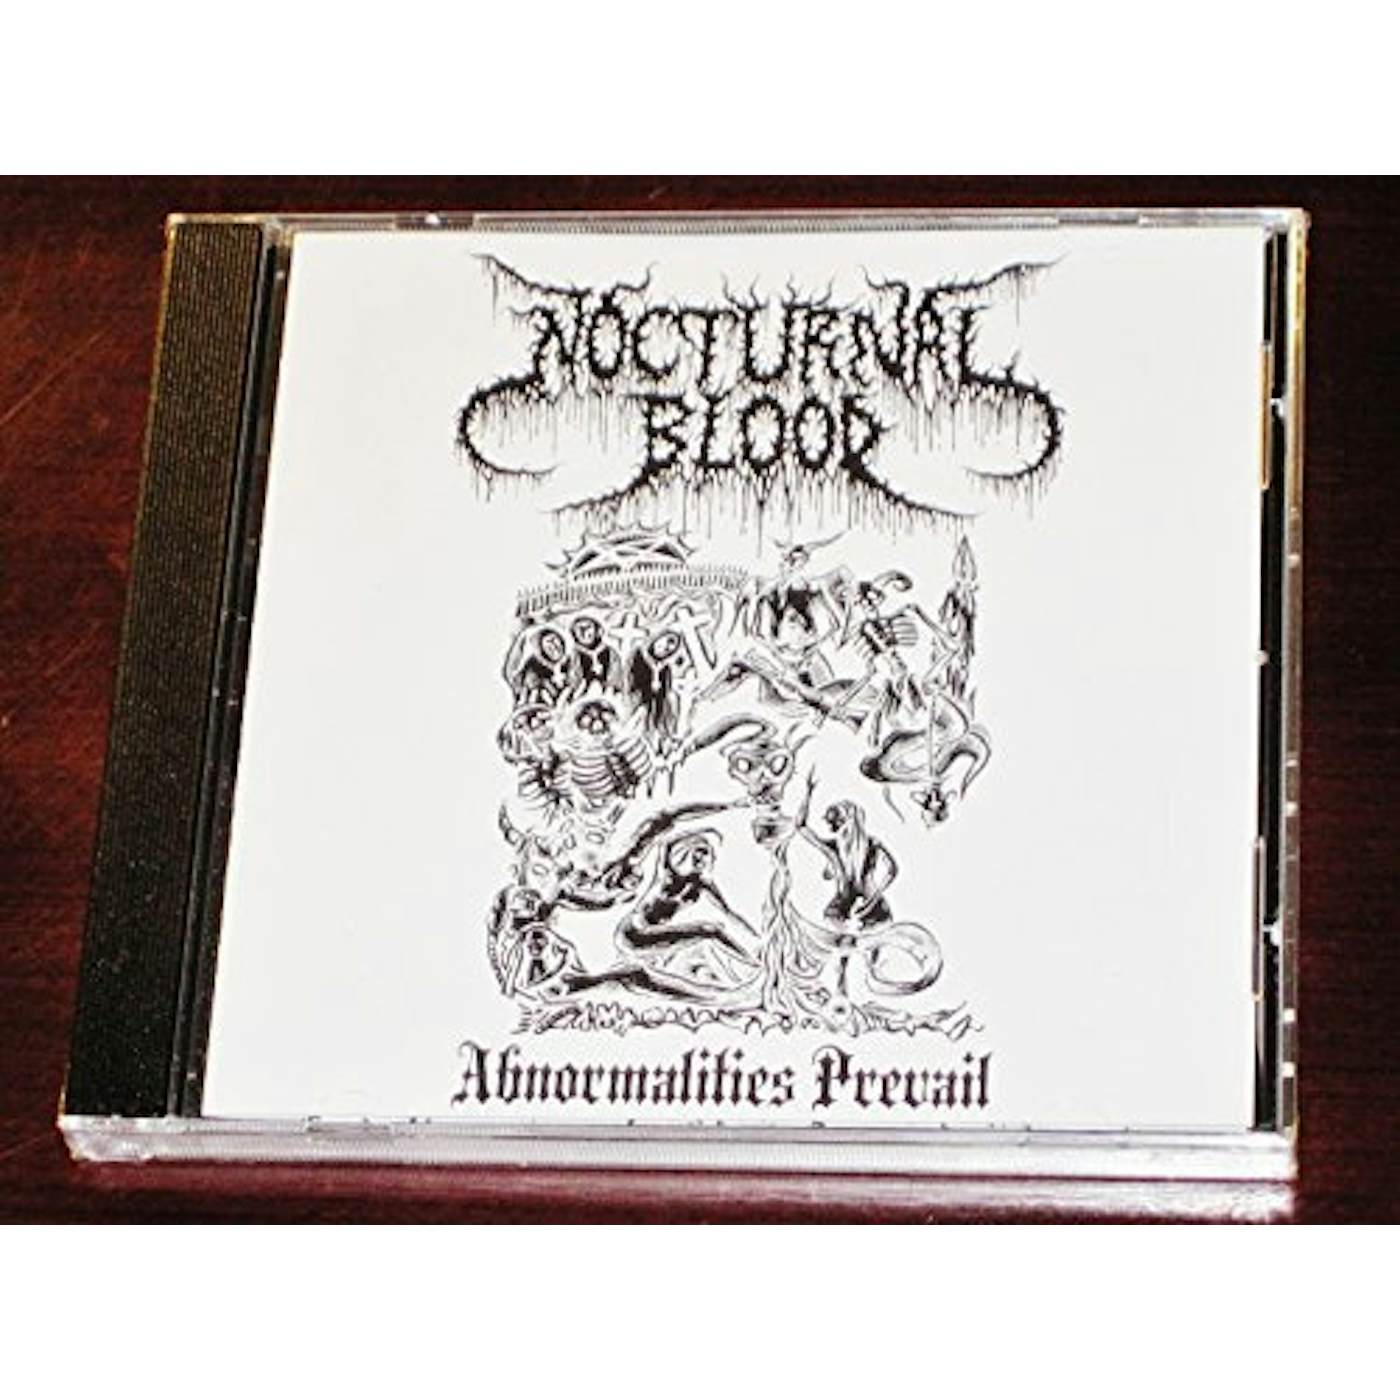 Nocturnal Blood ABNORMALITIES PREVAIL CD